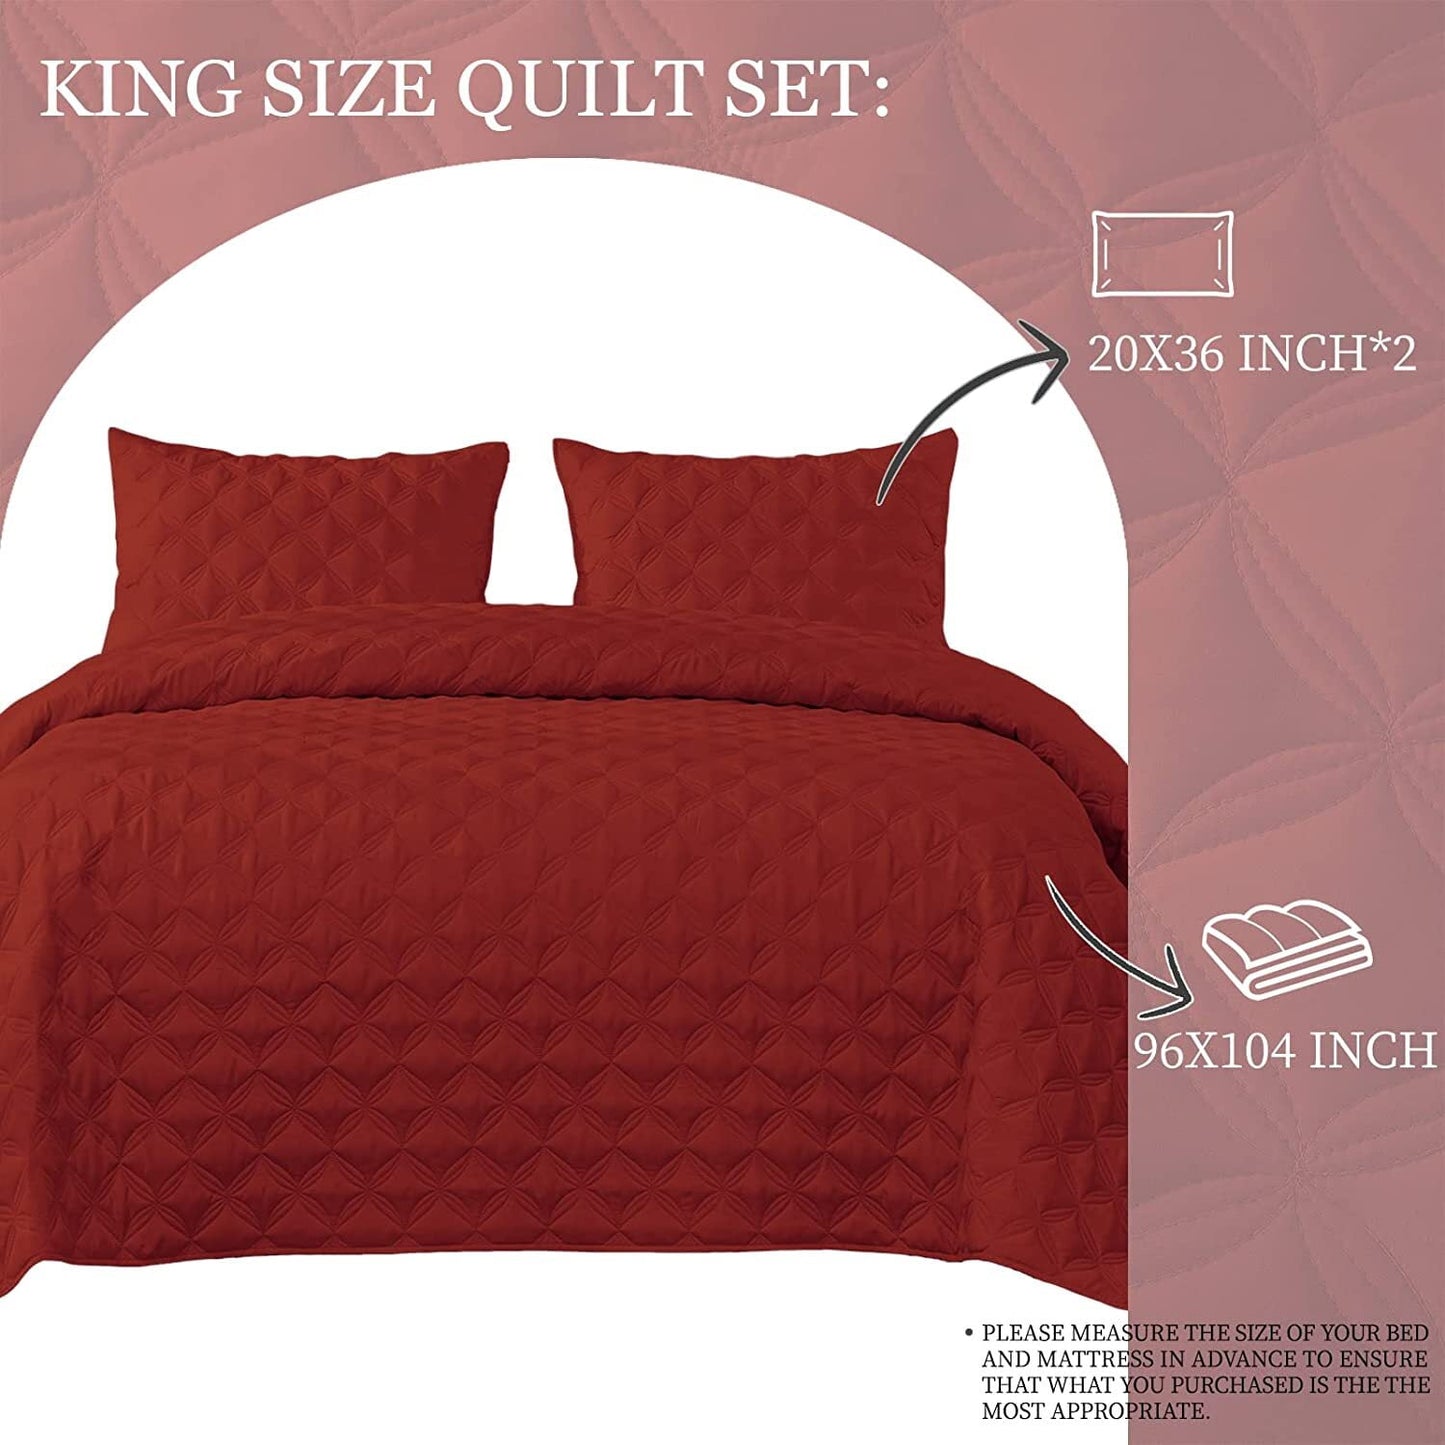 Exclusivo Mezcla Bed Quilt Set Queen Size for All Seasons, Stitched Pattern Quilted Bedspread/Bedding Set/Coverlet with 2 Pillow Shams, Lightweight and Soft, Red